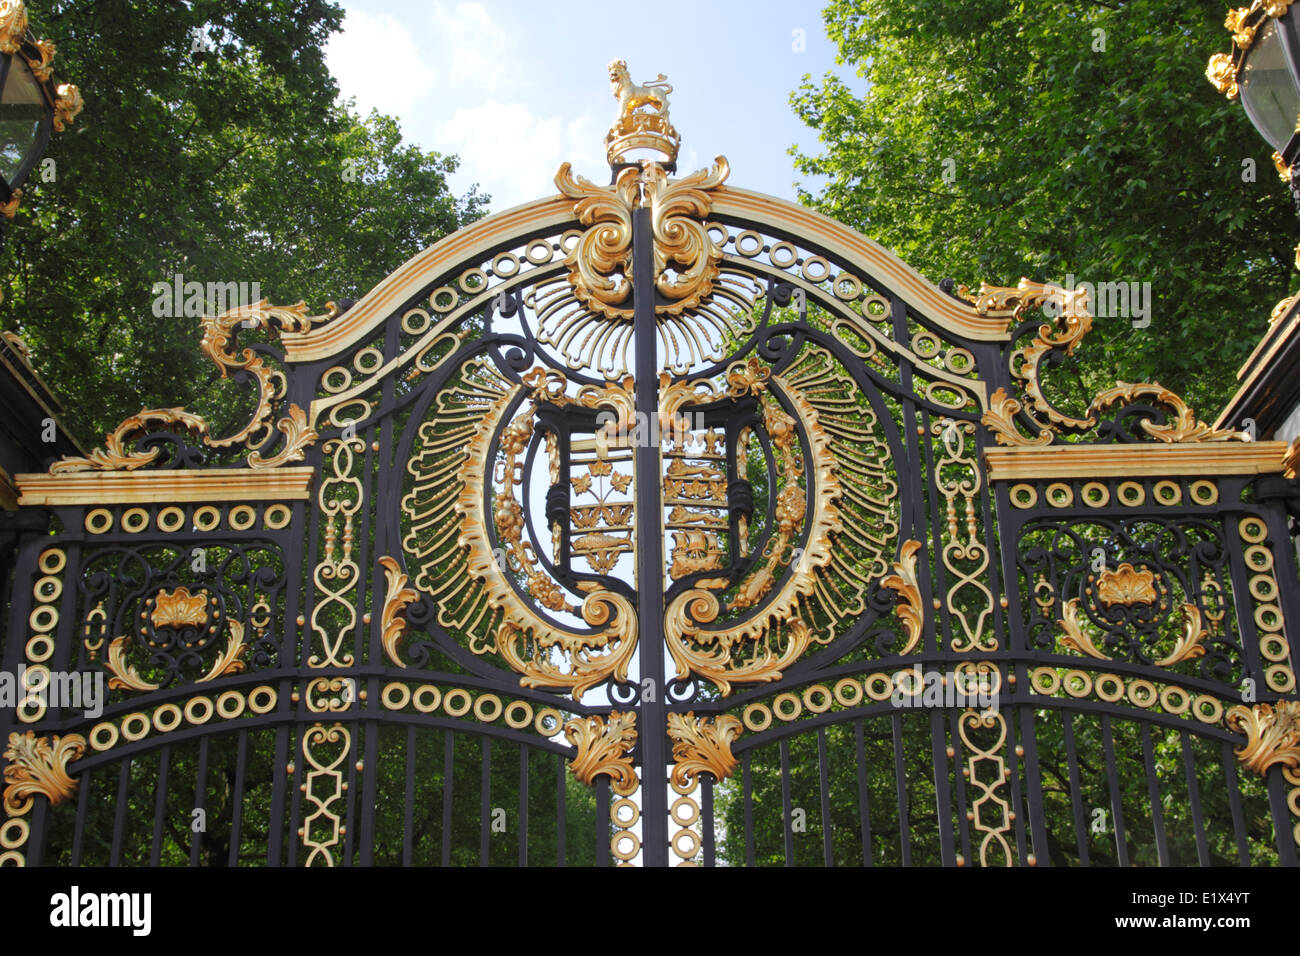 Canada Gate entrance to Green Park London Stock Photo